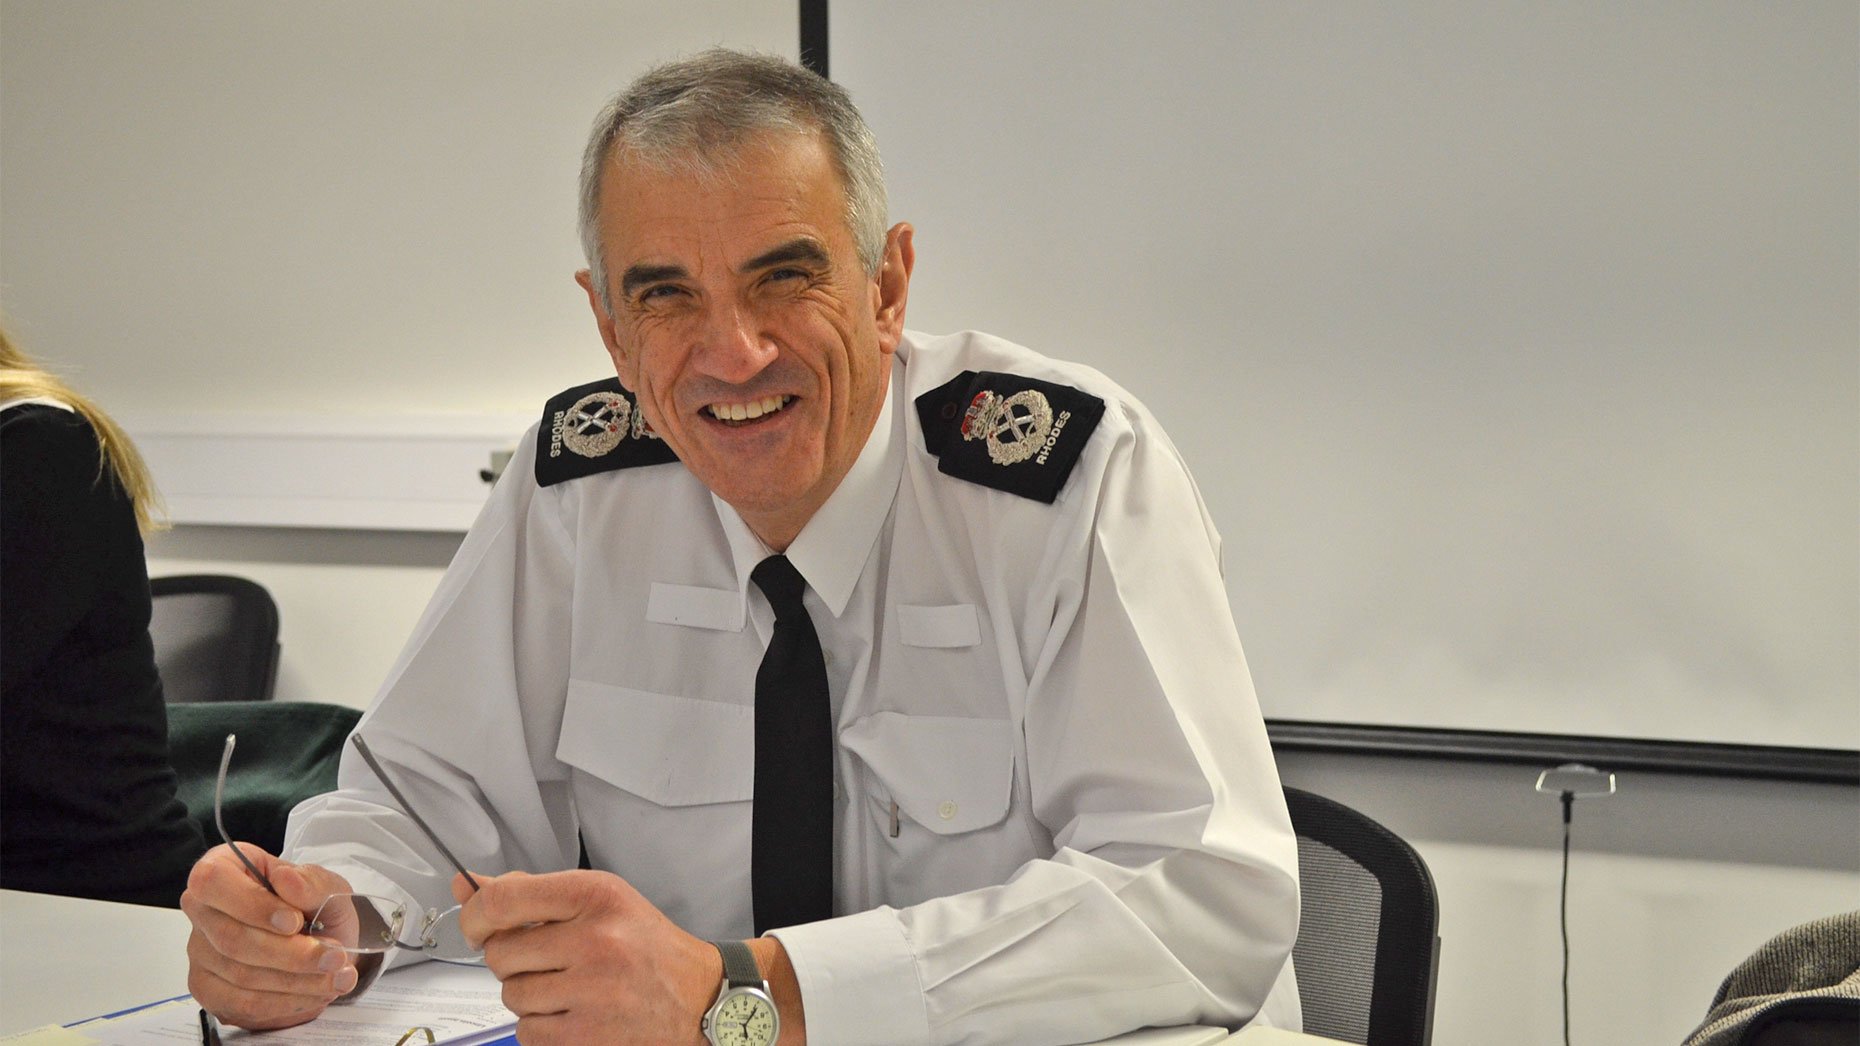 Chief Constable Neil Rhodes. Photo: The Lincolnite